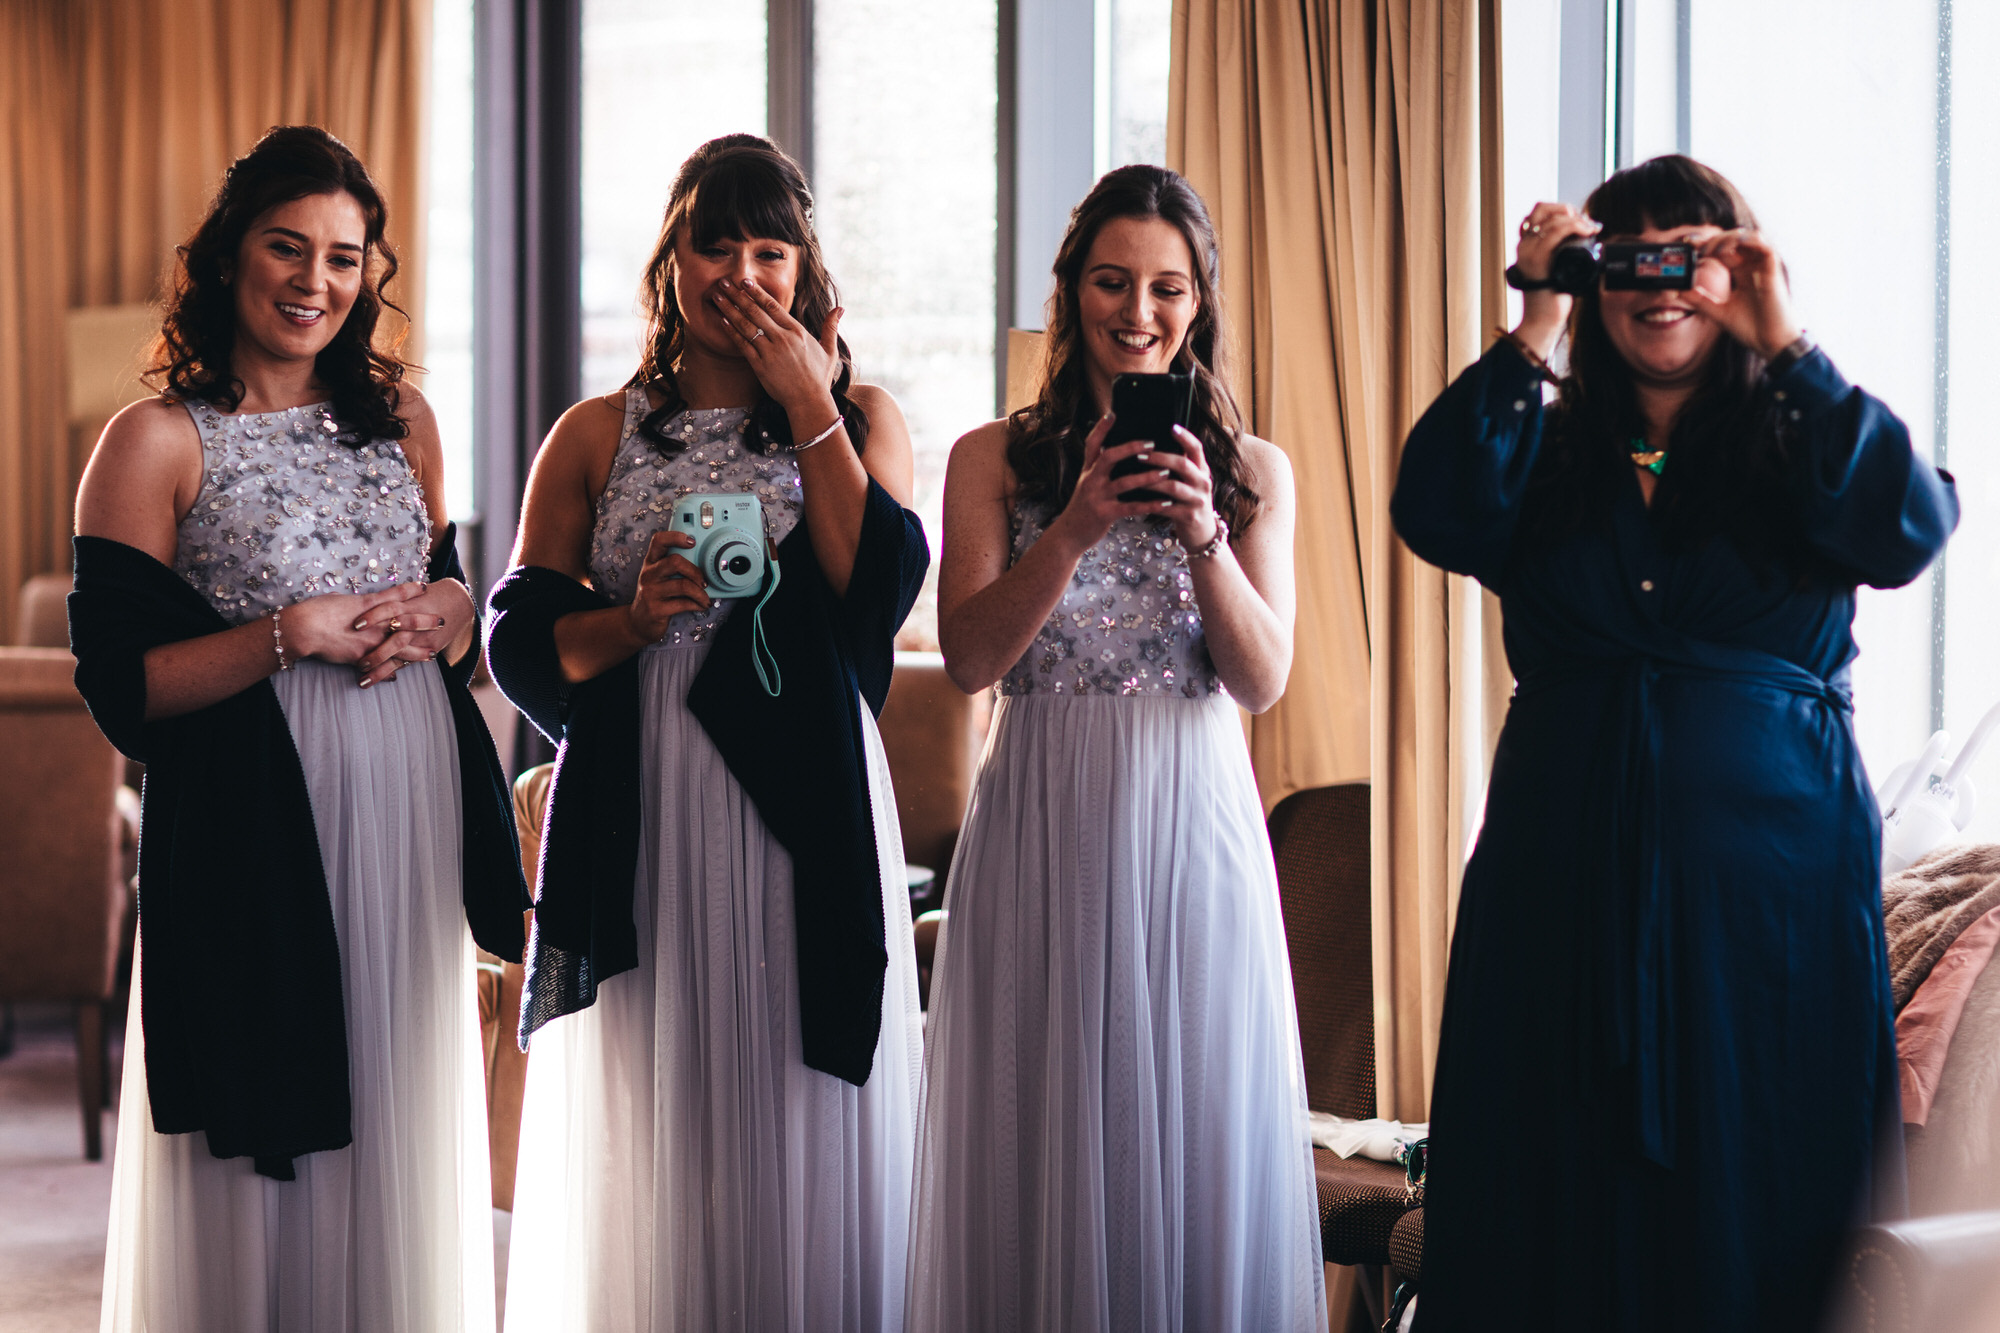 bridesmaids see bride for first time fully ready and get emotional